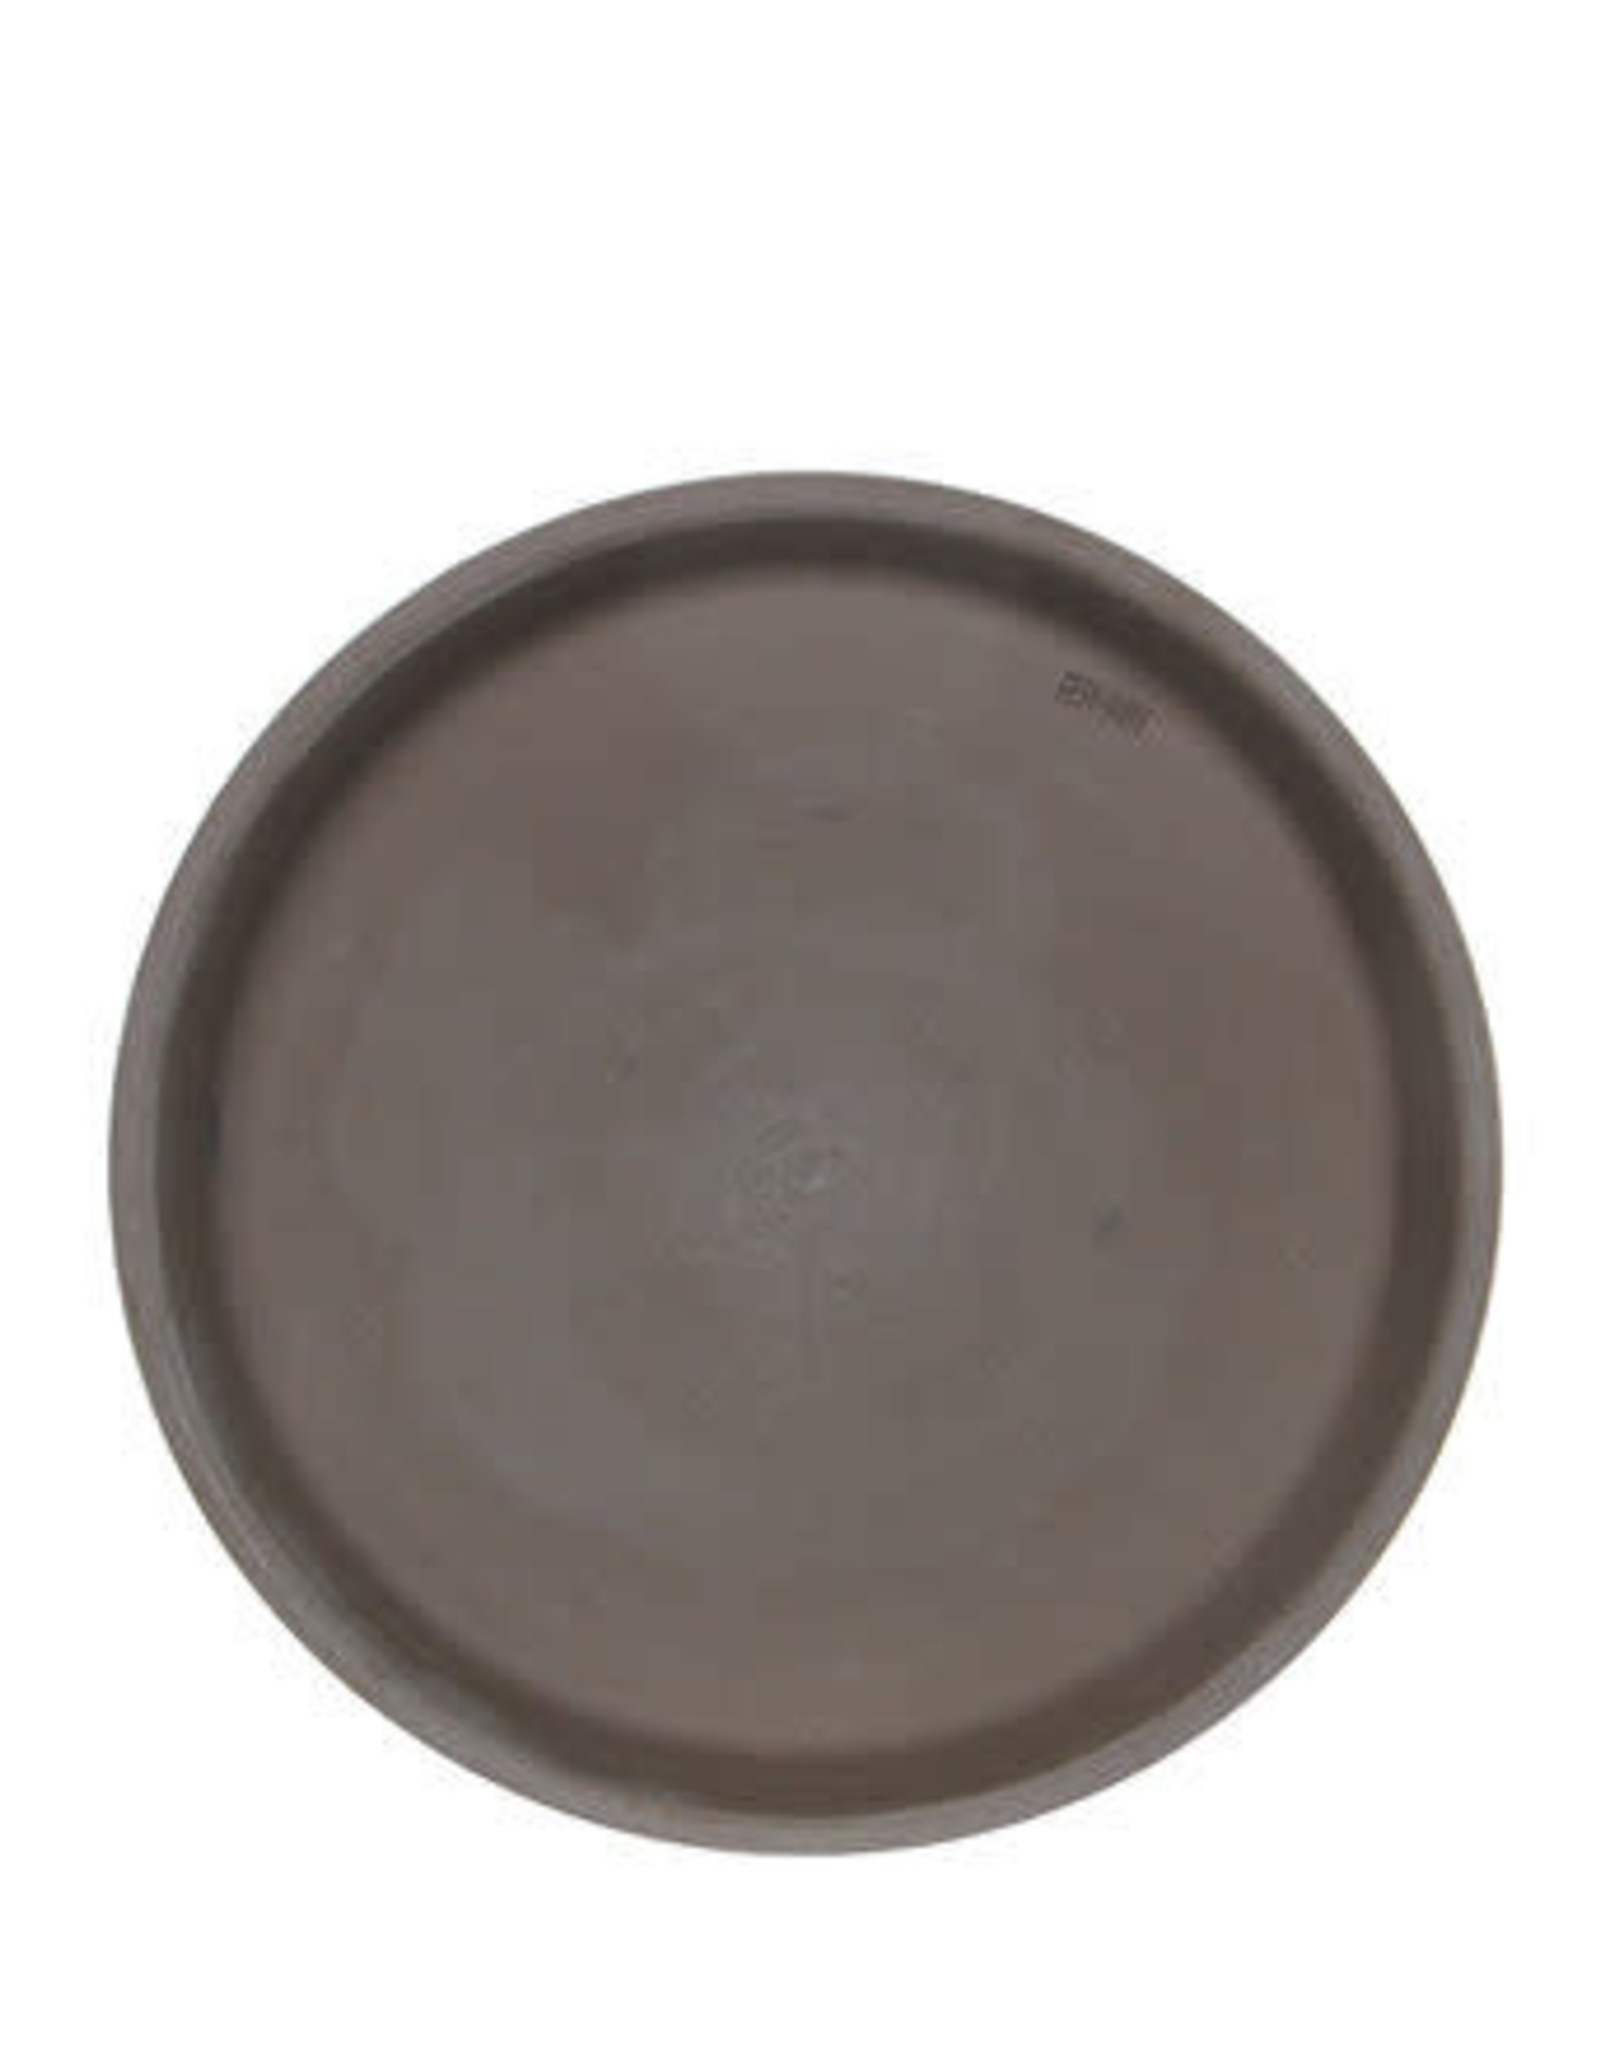 Rustik Lys plate outdoor candle